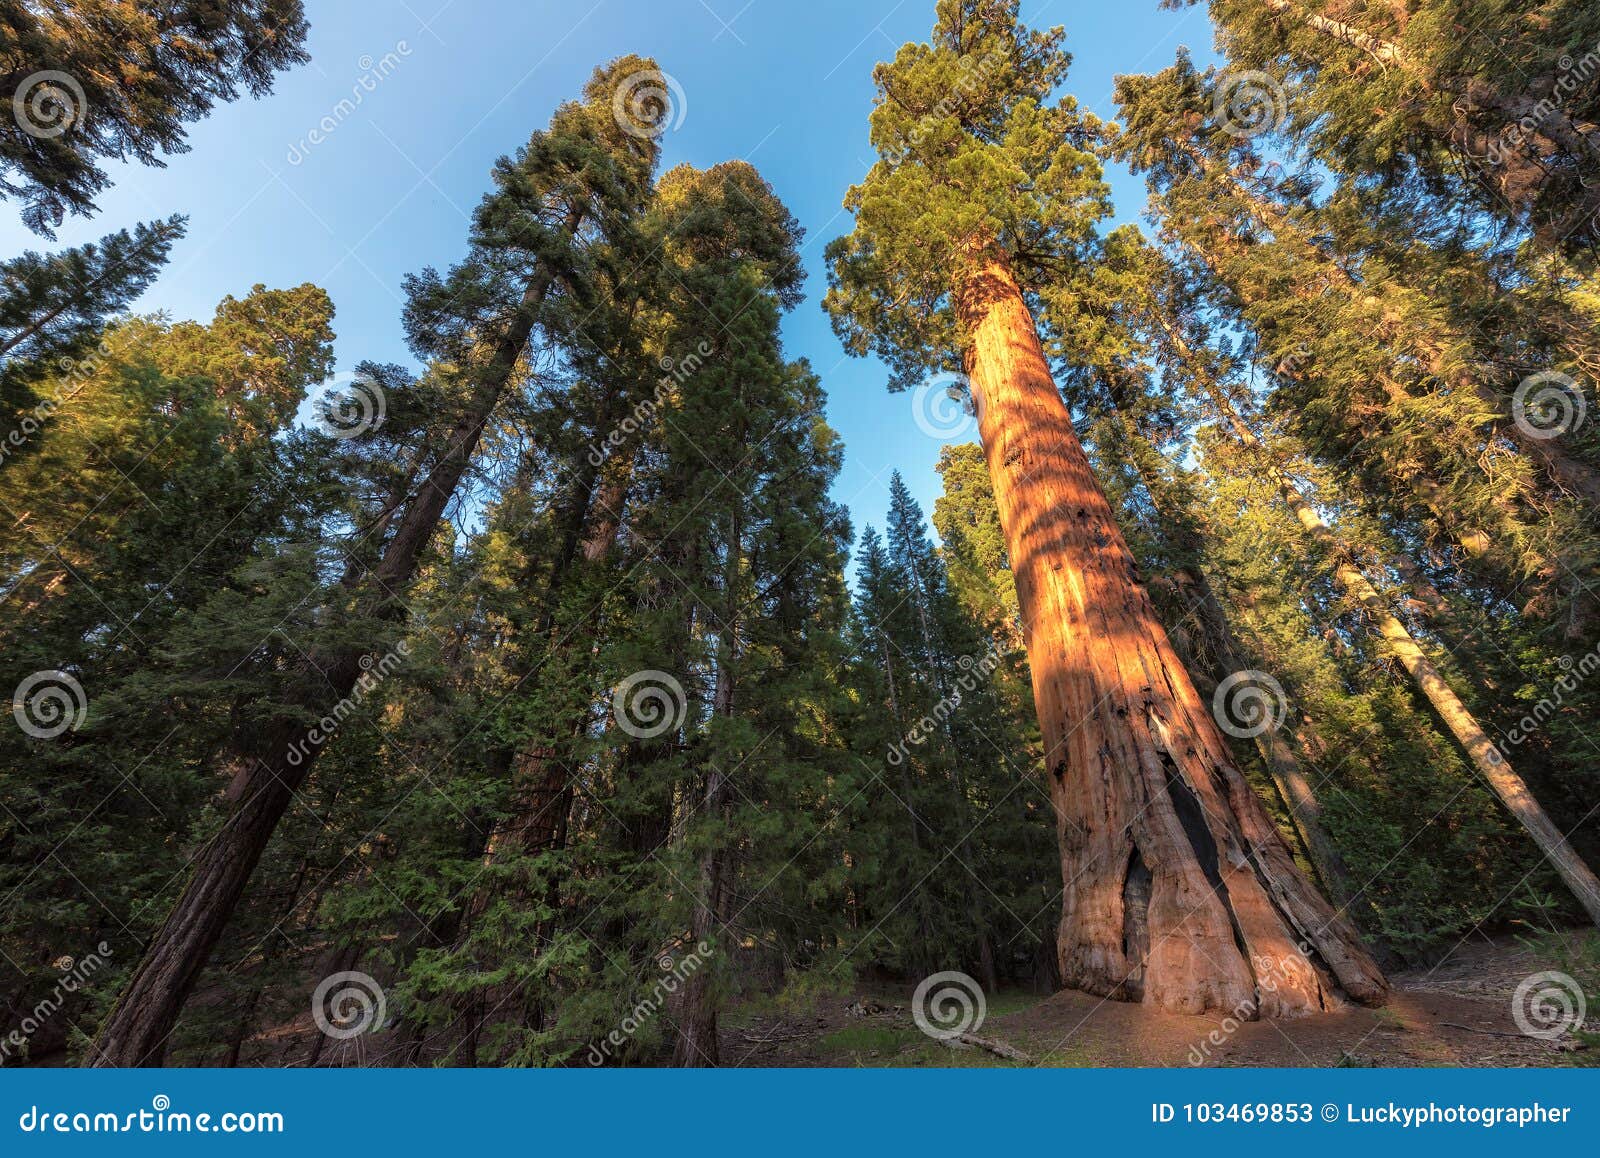 giant sequoias in the sequoia national park in california